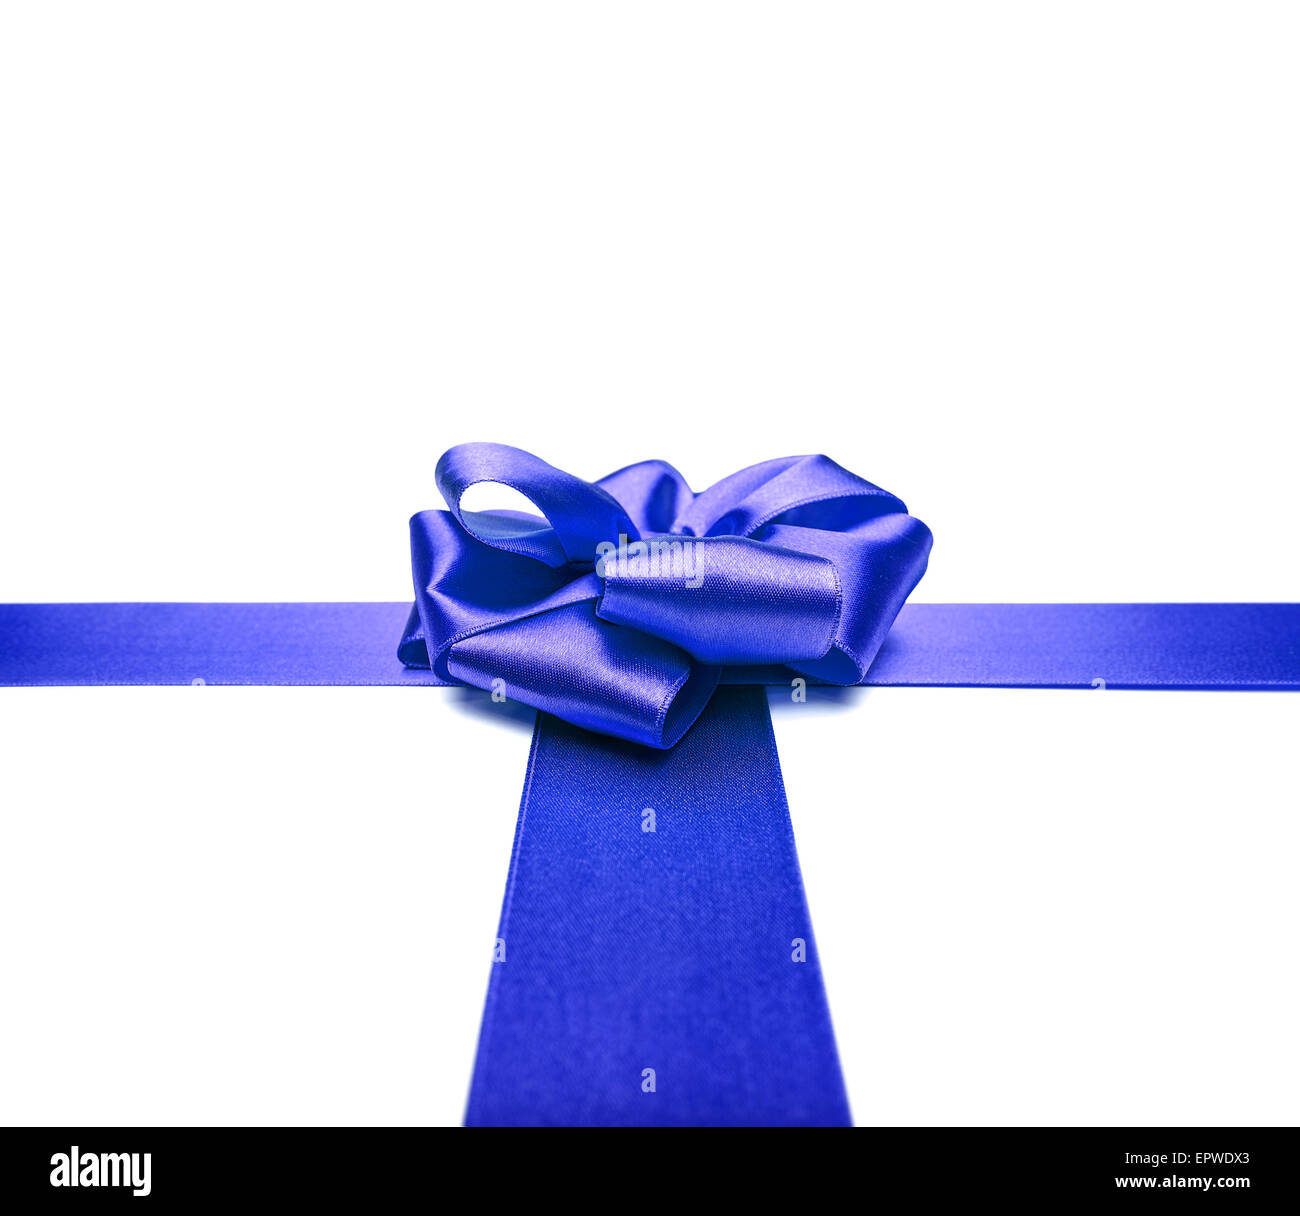 Blue ribbons with bow Stock Photo